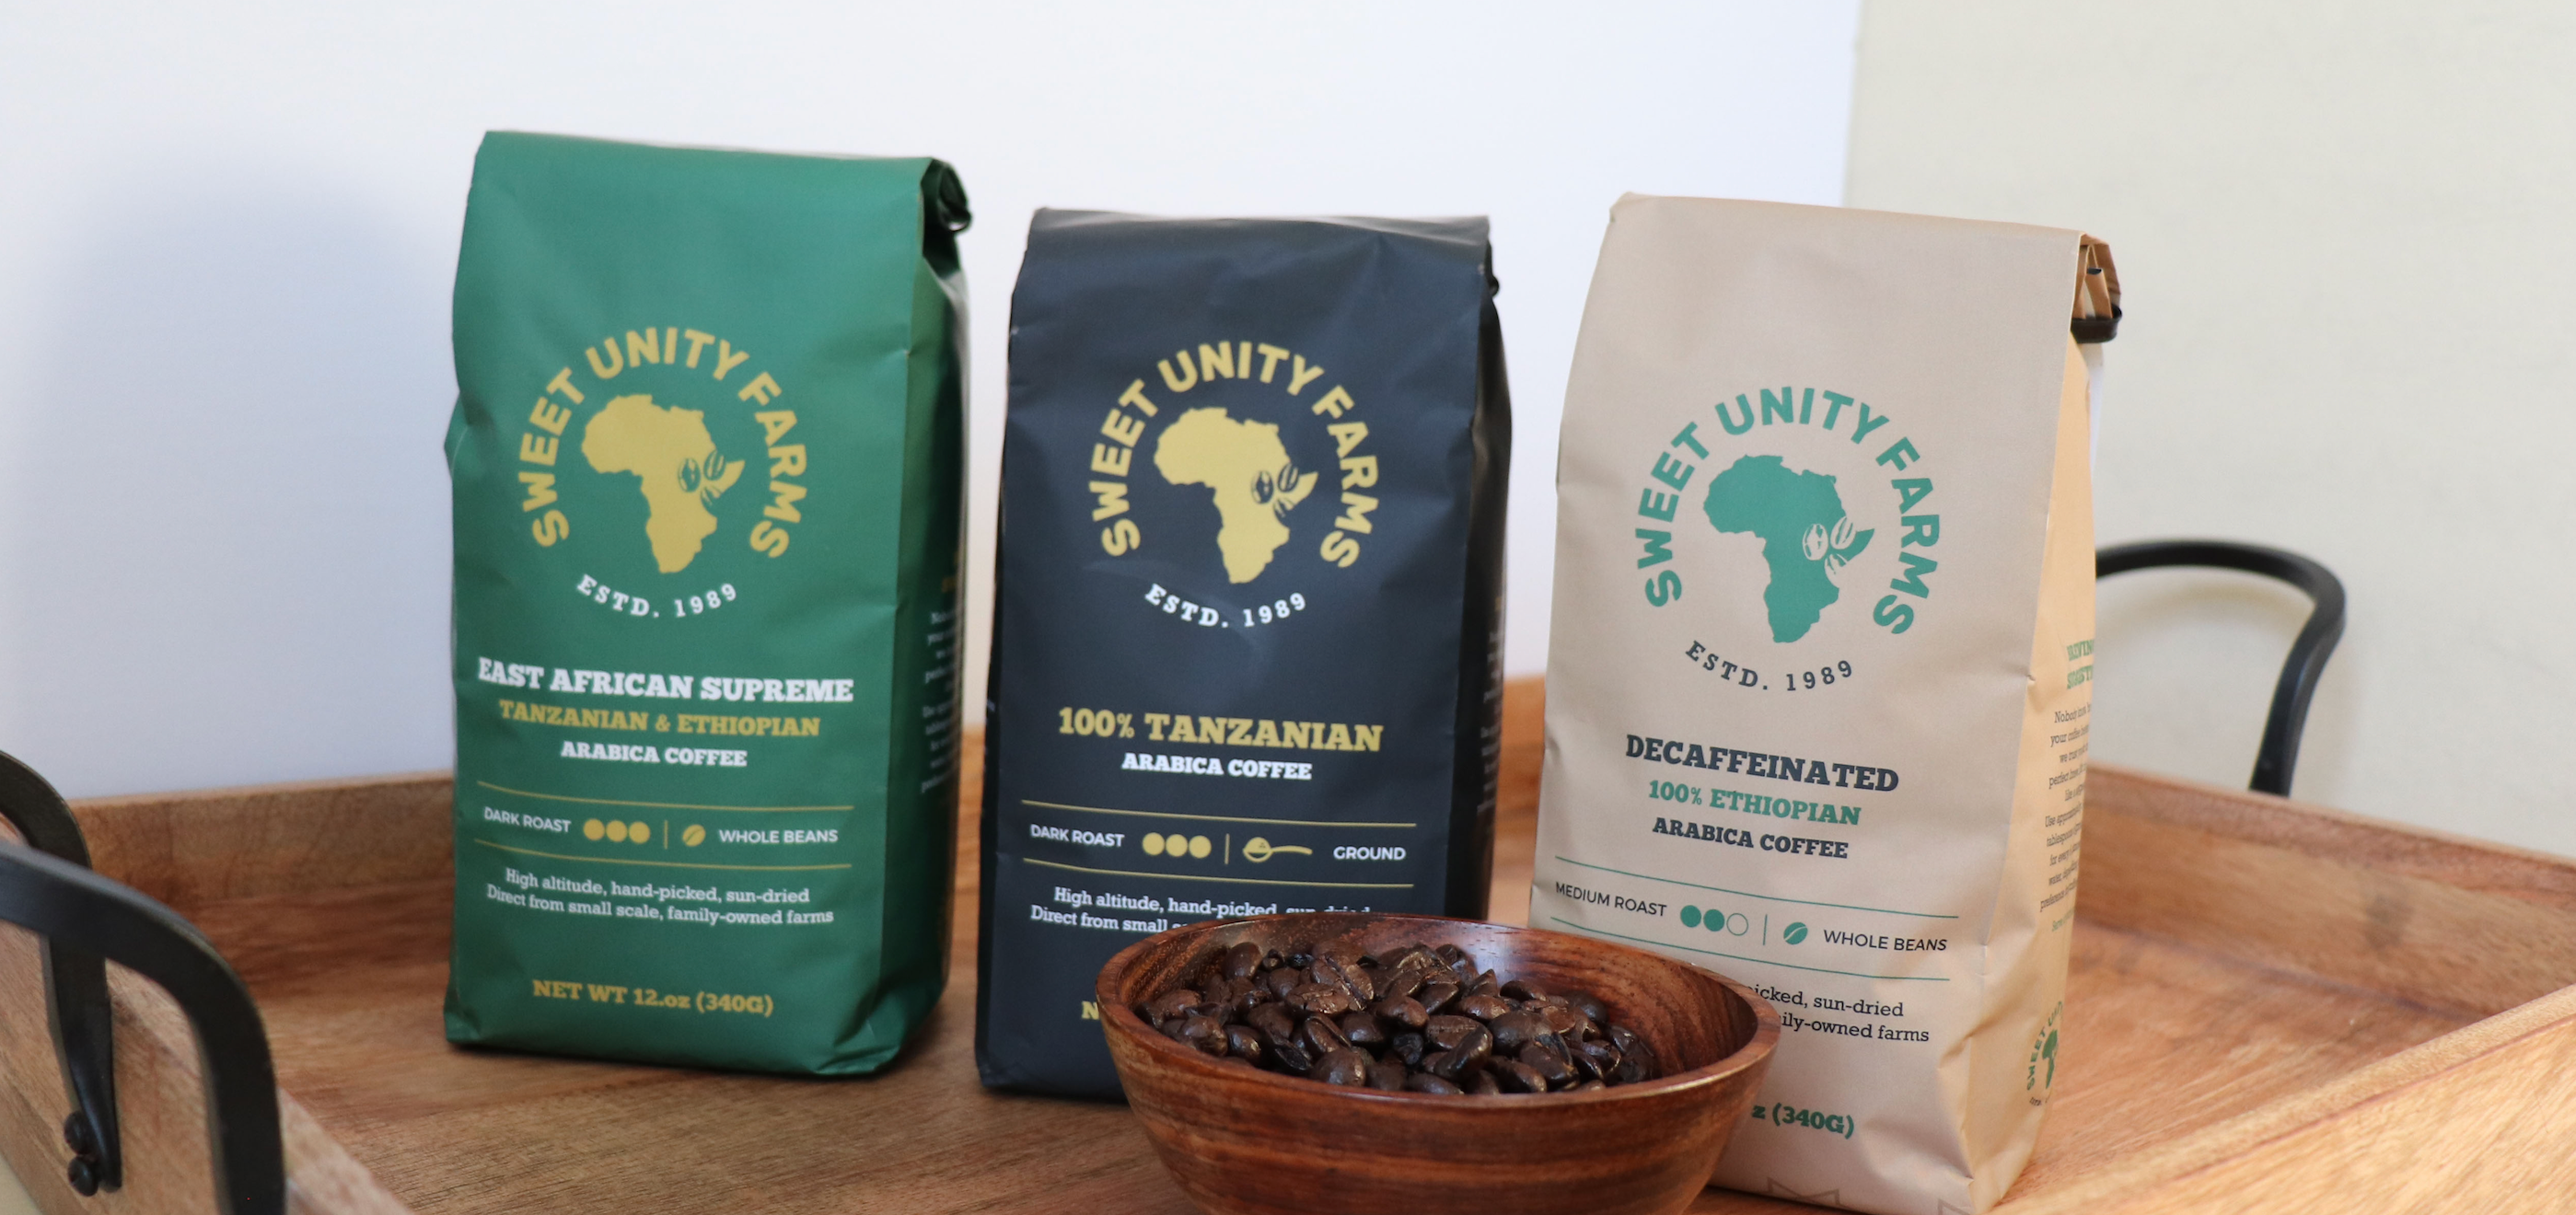 Image of Sweet Unity coffee bags, green, black and tan. 